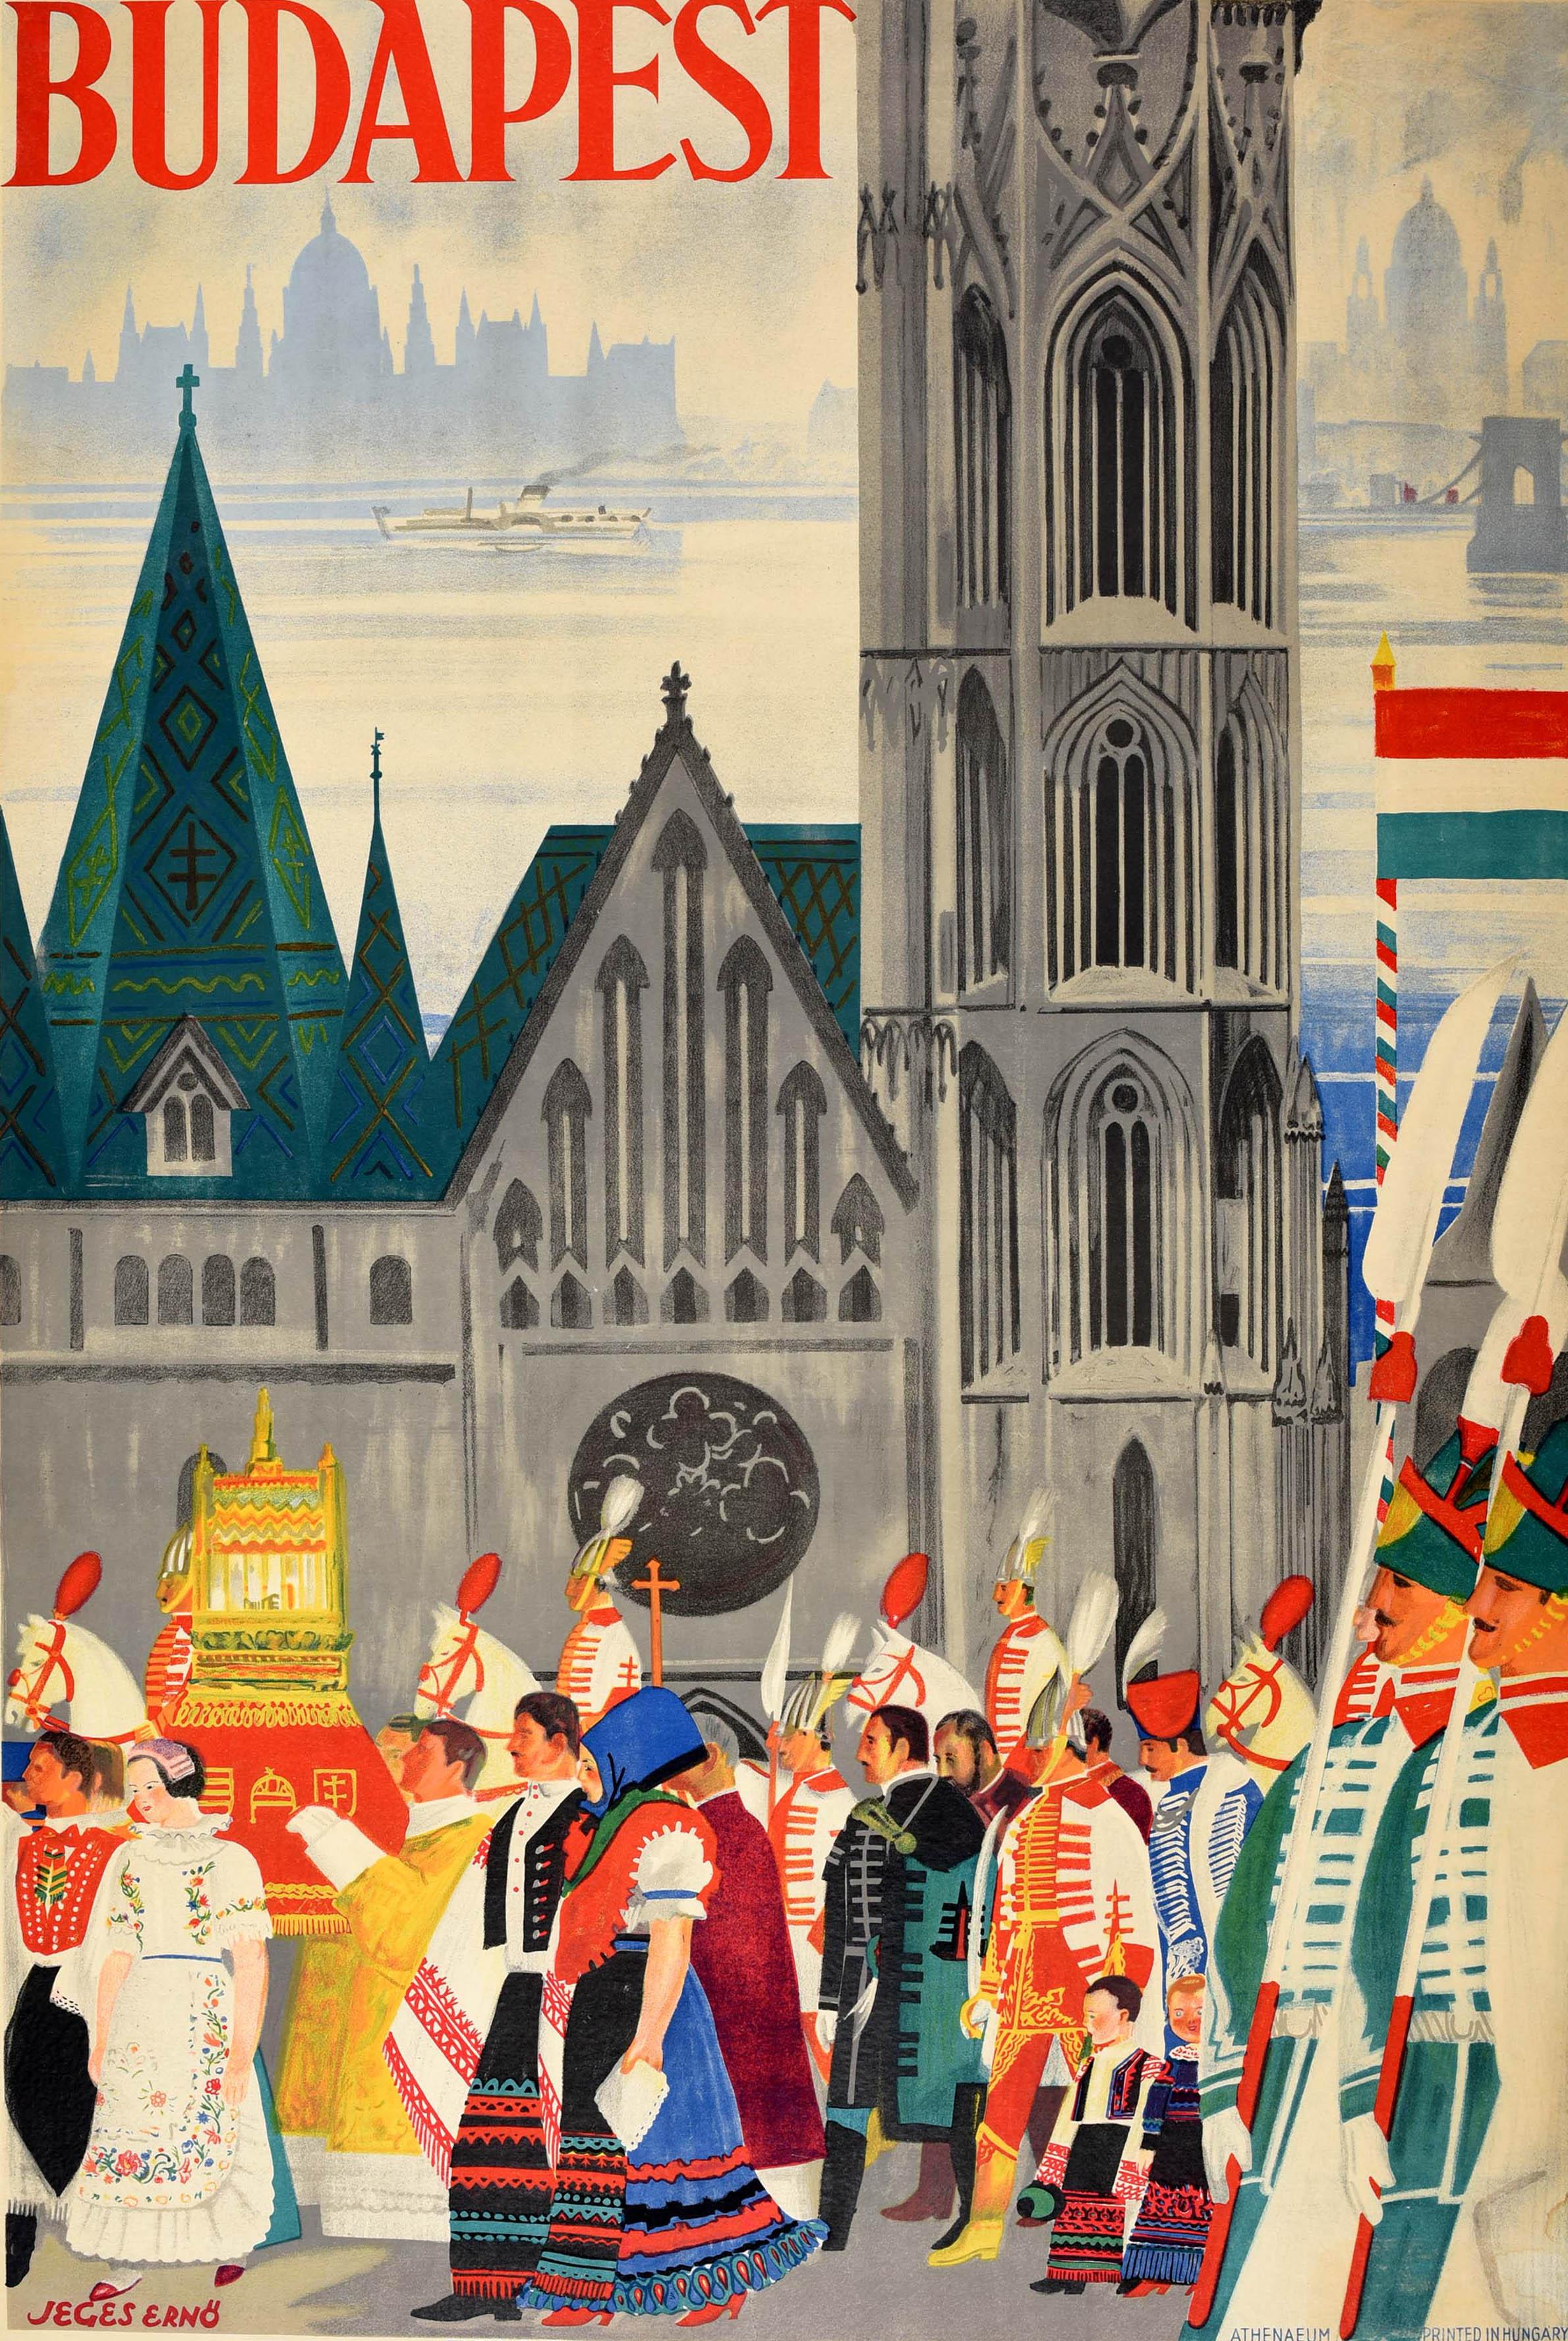 Original vintage travel poster for Budapest featuring a great illustration by Jeges Erno (1898-1956) depicting a festival procession of people in traditional dress walking past the historic 11th century Matthias Church on Holy Trinity Square with a